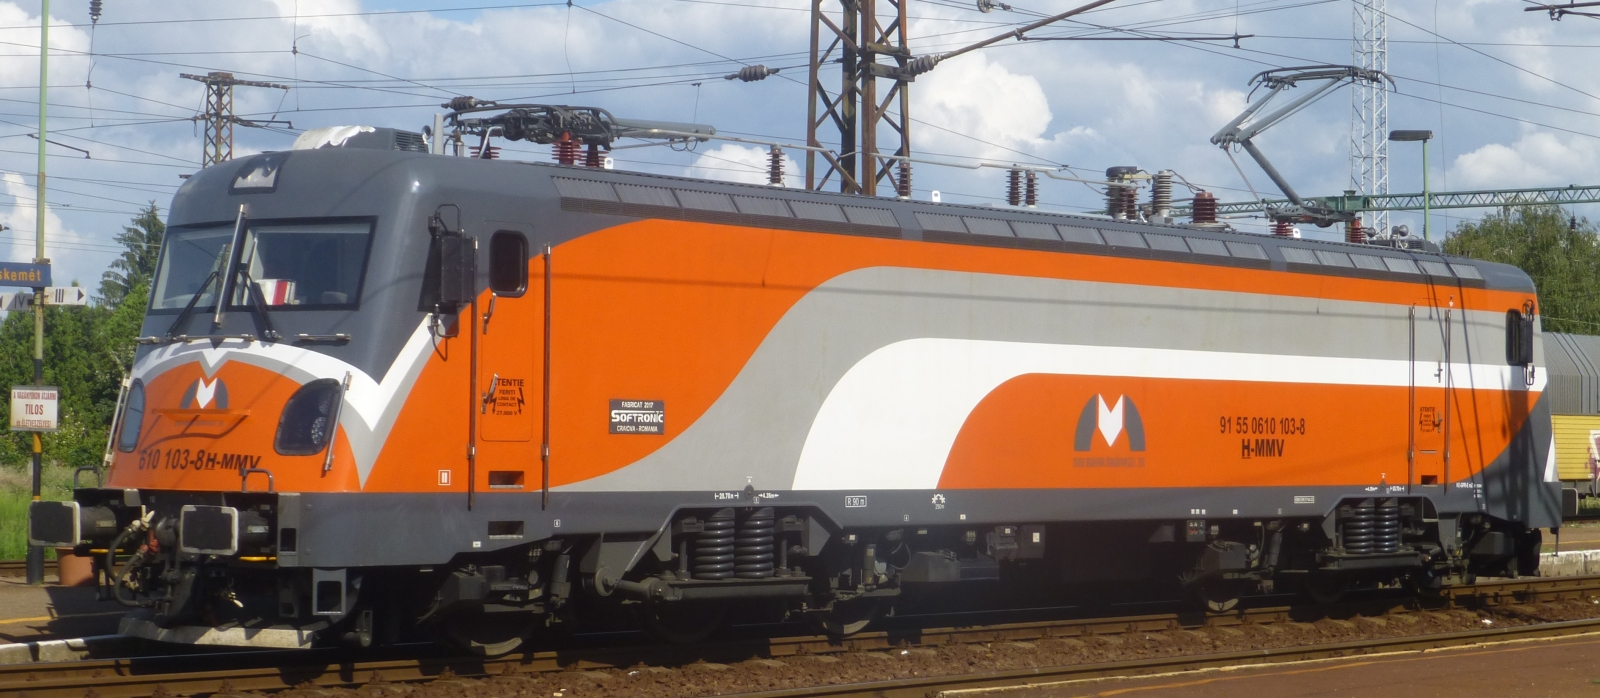 Transmontana with a crash-optimized front of the Magyar Magánvasút (MMV) in June 2018 in Kecskemét